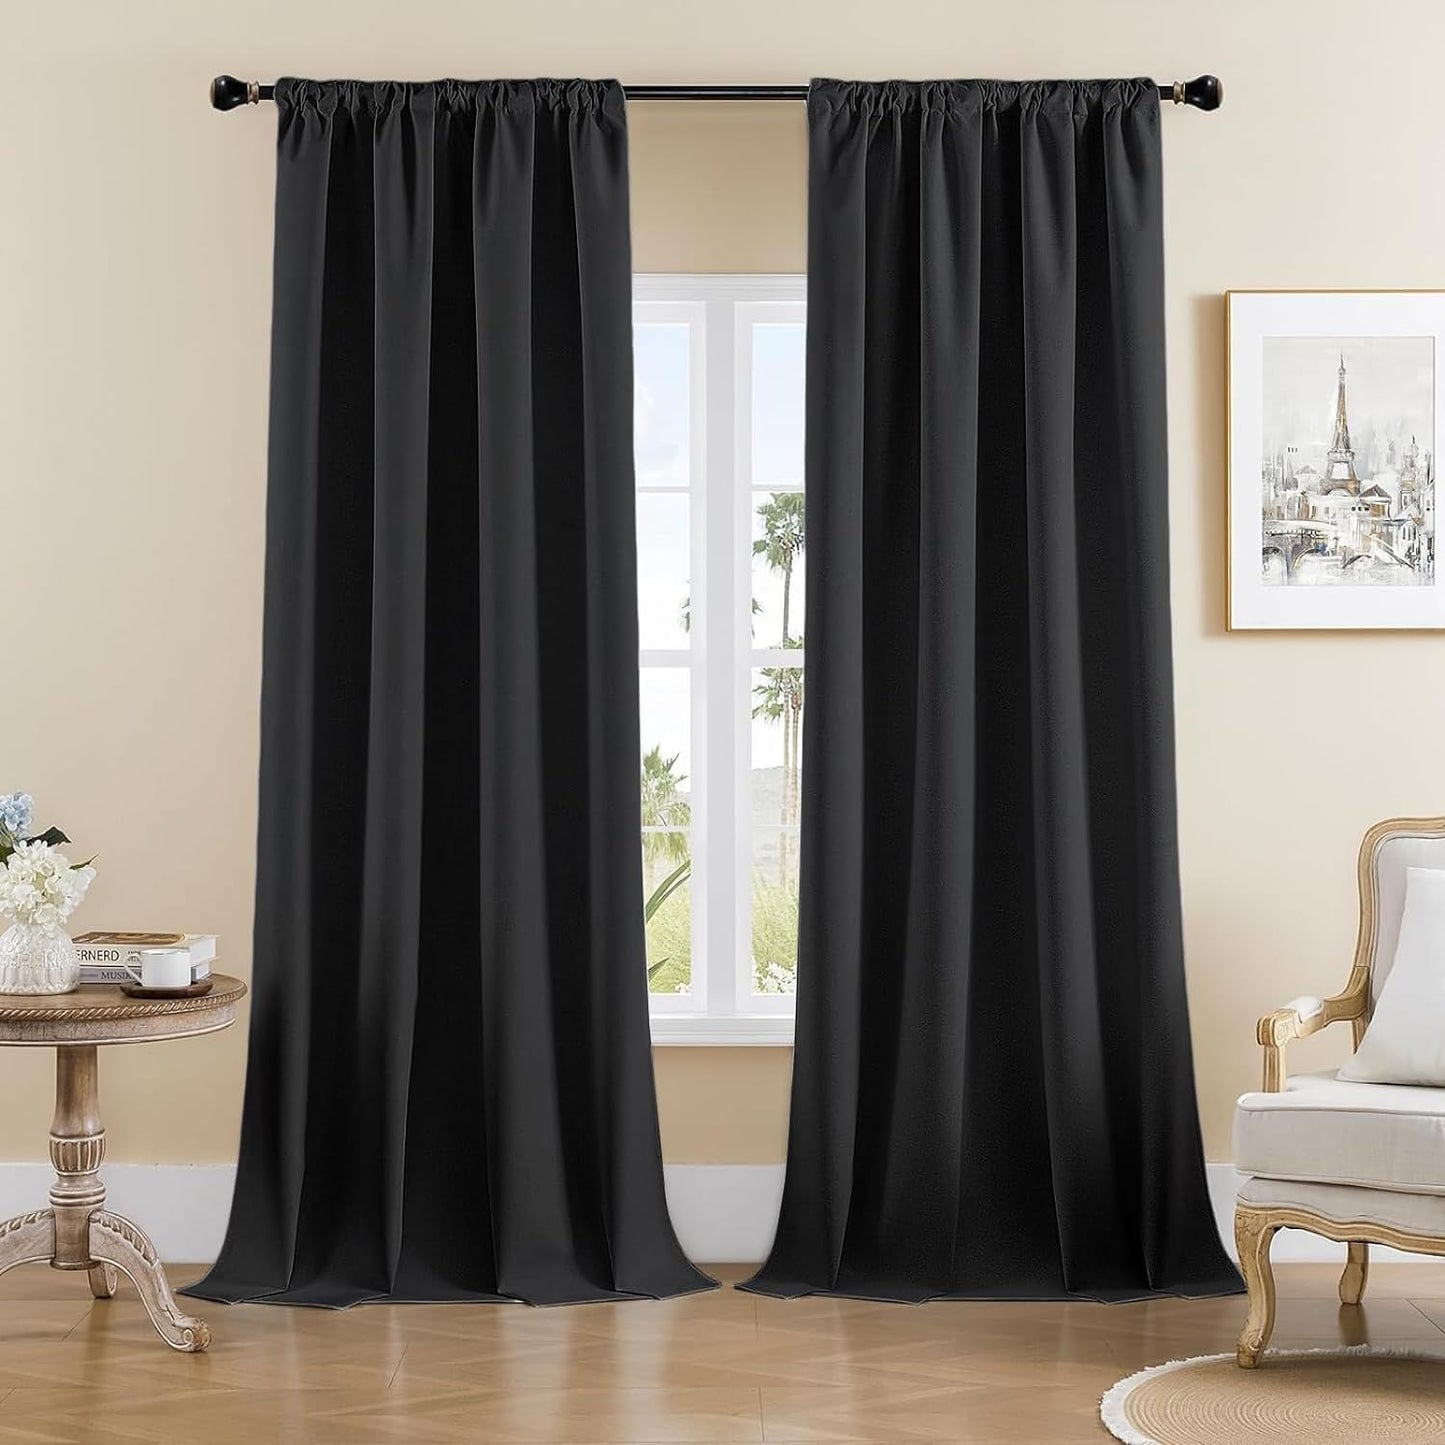 Joydeco Faux Linen Blackout Curtains for Bedroom,Light Grey Blackout Curtains 96 Inches Long,100% Blackout Sound Proof Thermal Insulated Window Drapes Luxury Decor（W52Xl96 Inch,Light Grey）  Joydeco Black 52W X 108L Inch X 2 Panels 